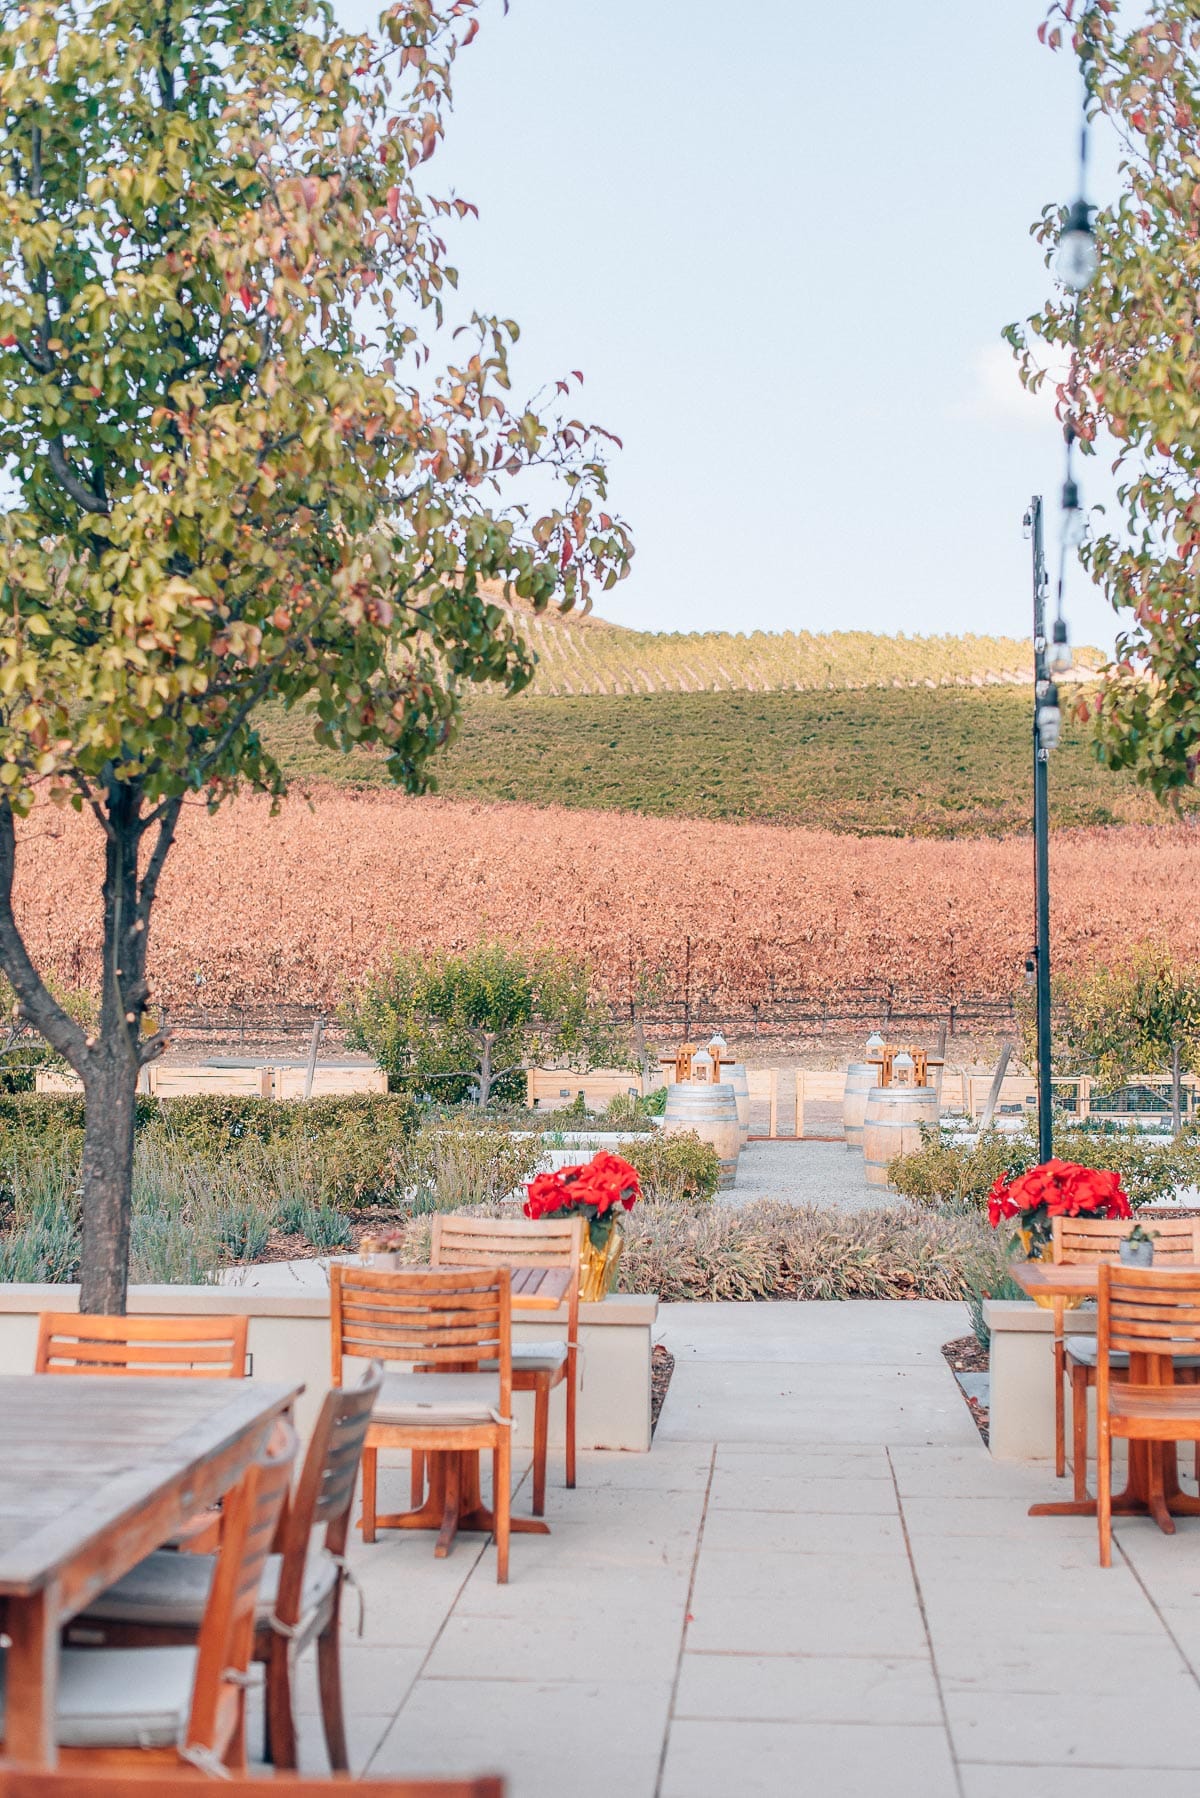 Visiting Justin Winery in Paso Robles, California